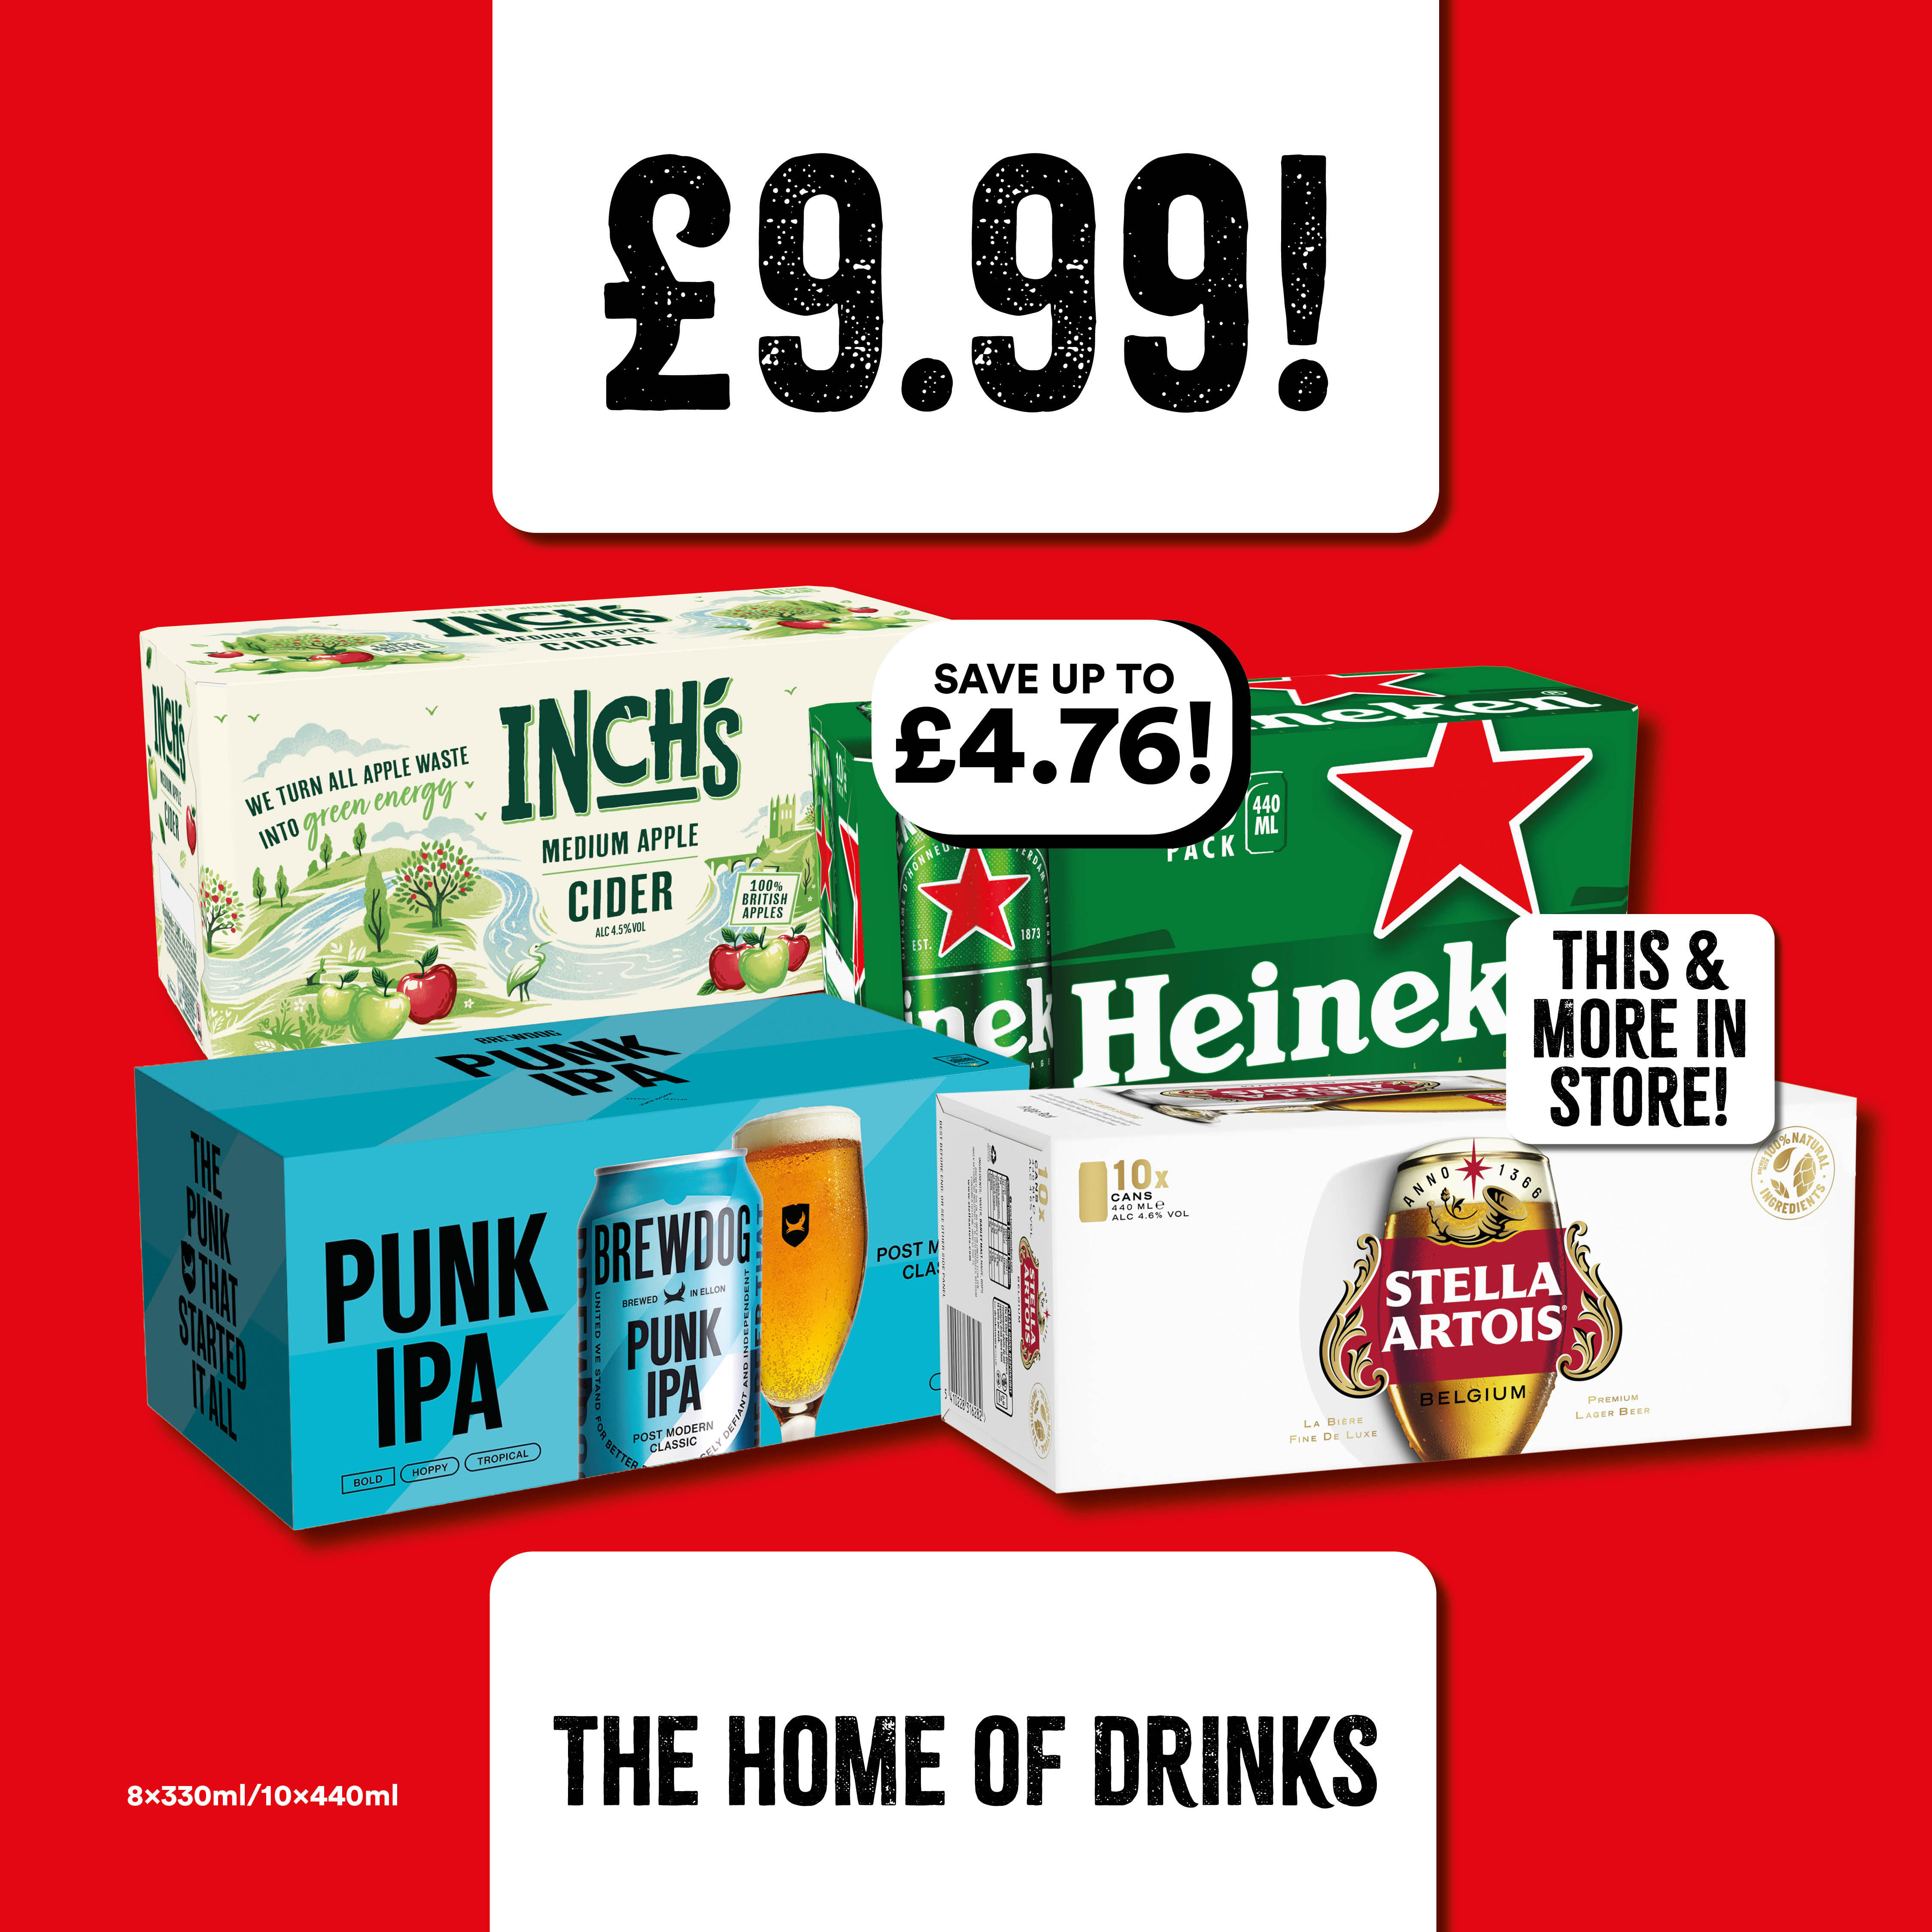 Beers 8 x 330ml/10 x 440ml 
Only £9.99 Bargain Booze Select Convenience Leicester 01162 302553